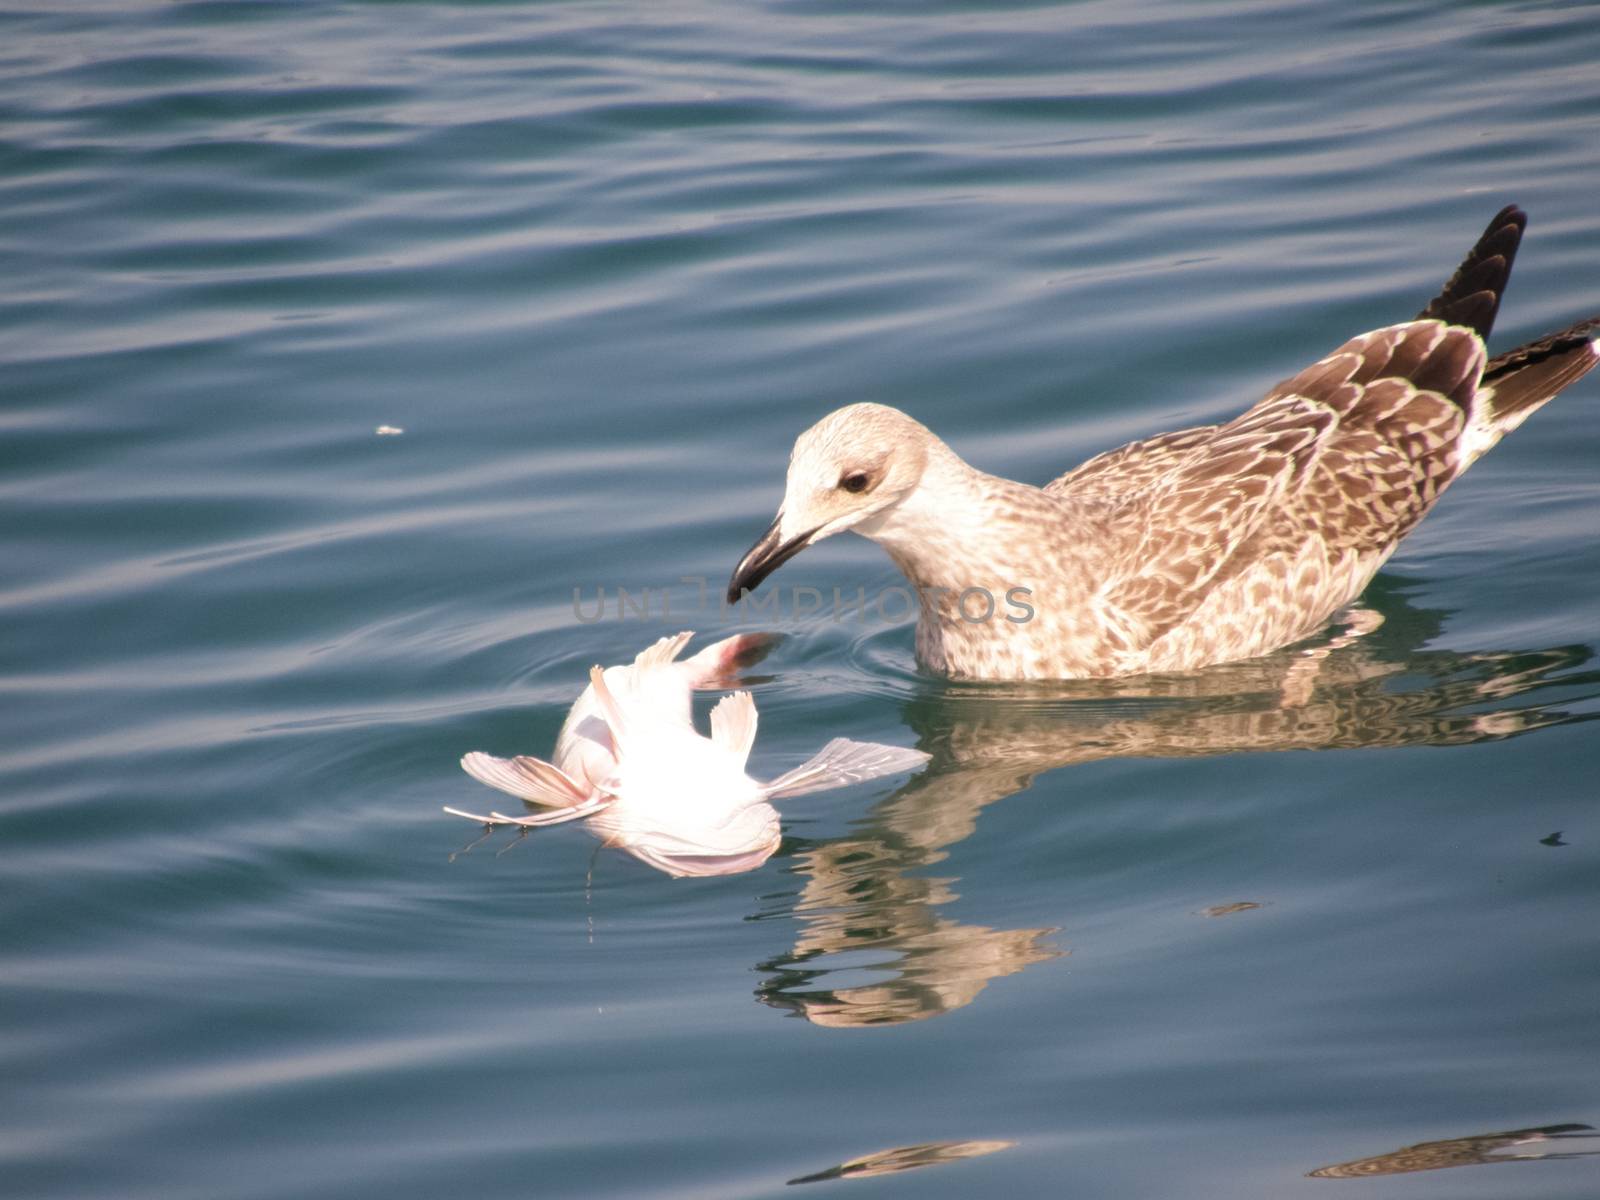 seagull eats dead fish. Feeding seagulls in the sea. by DePo